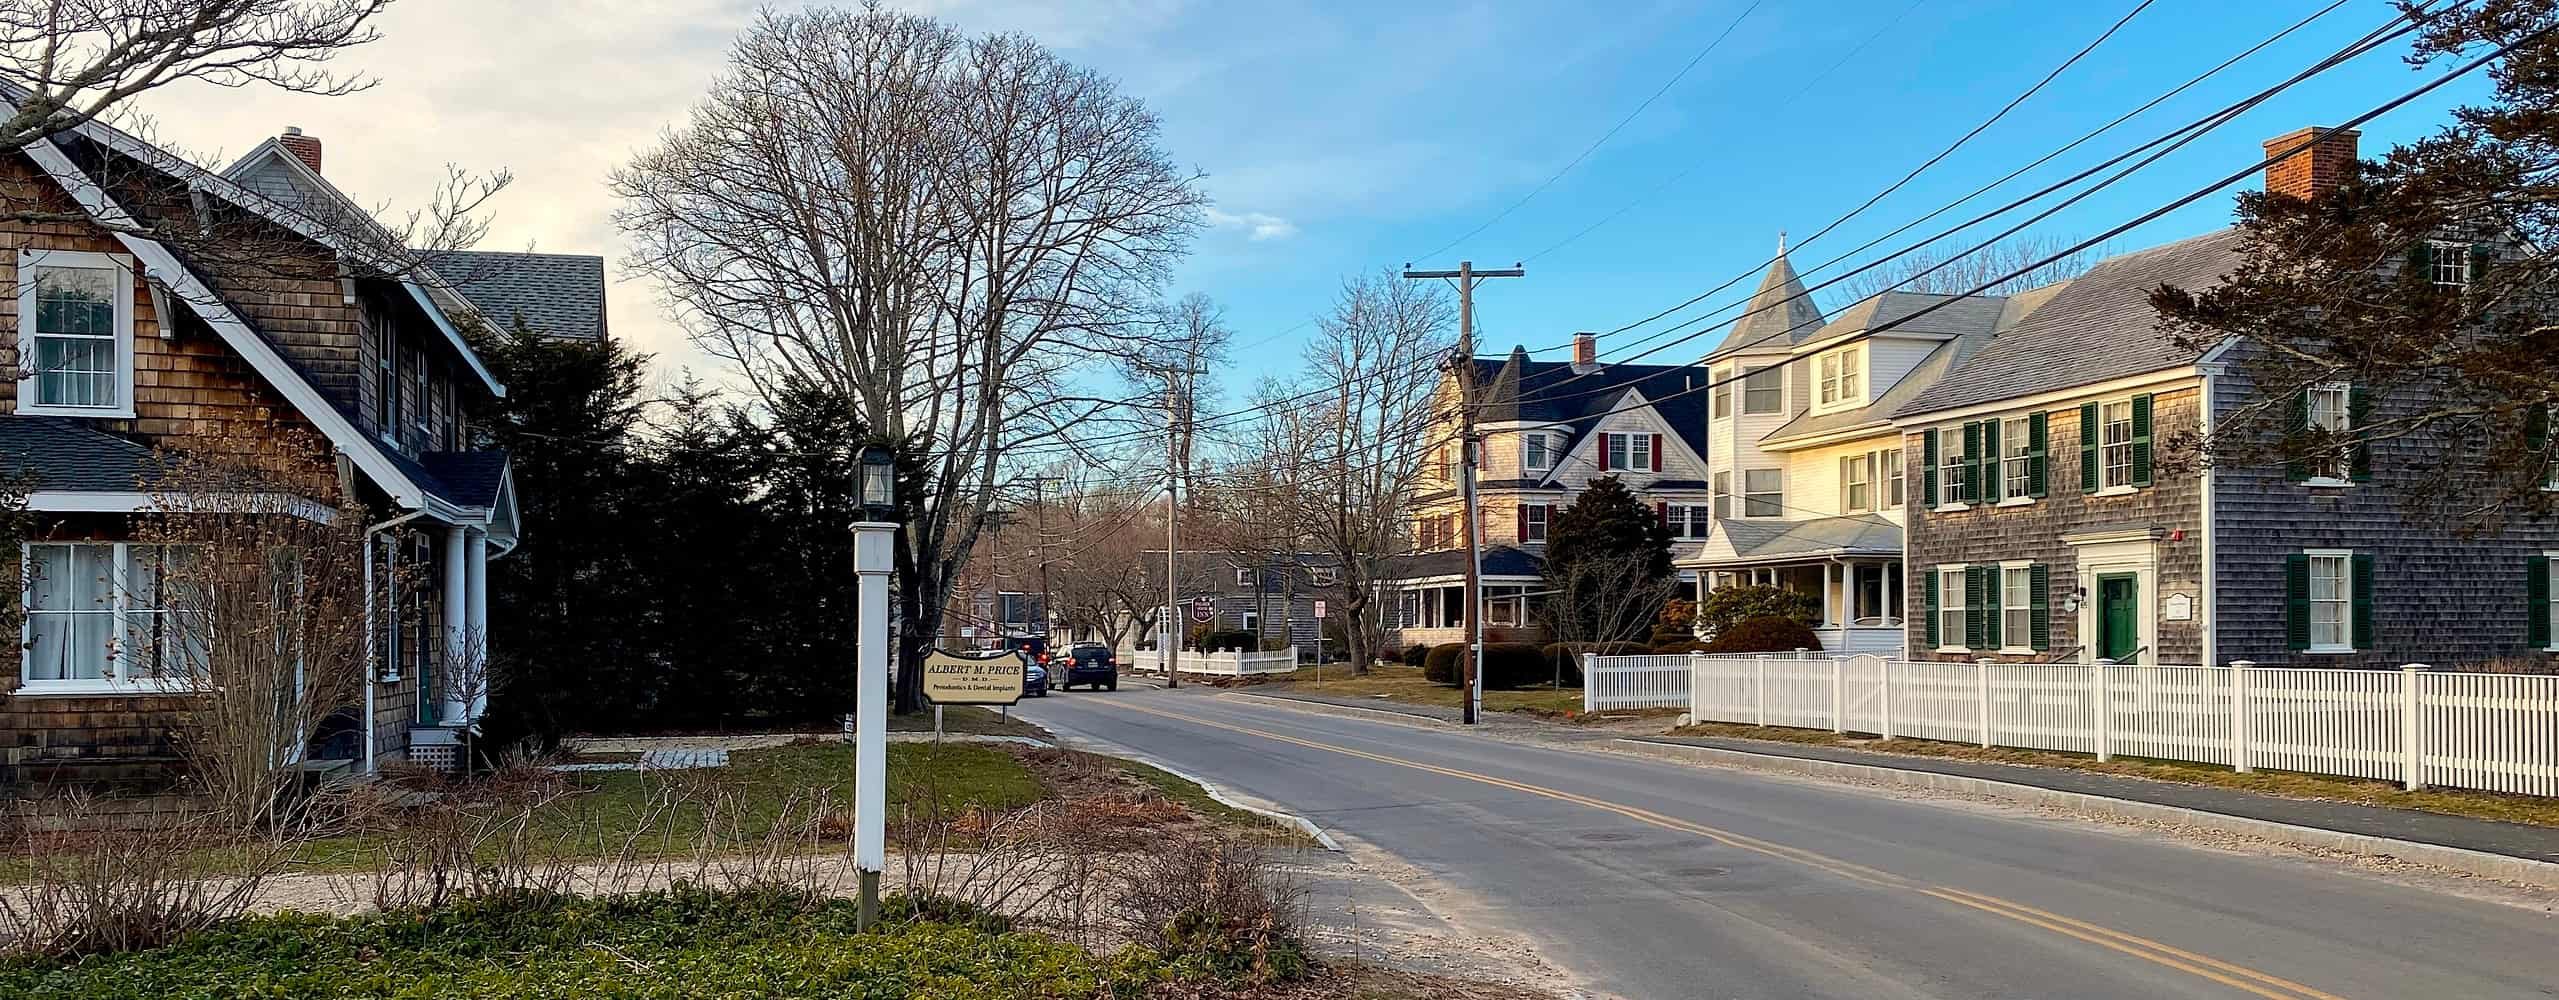 View of historic street on Cape Cod